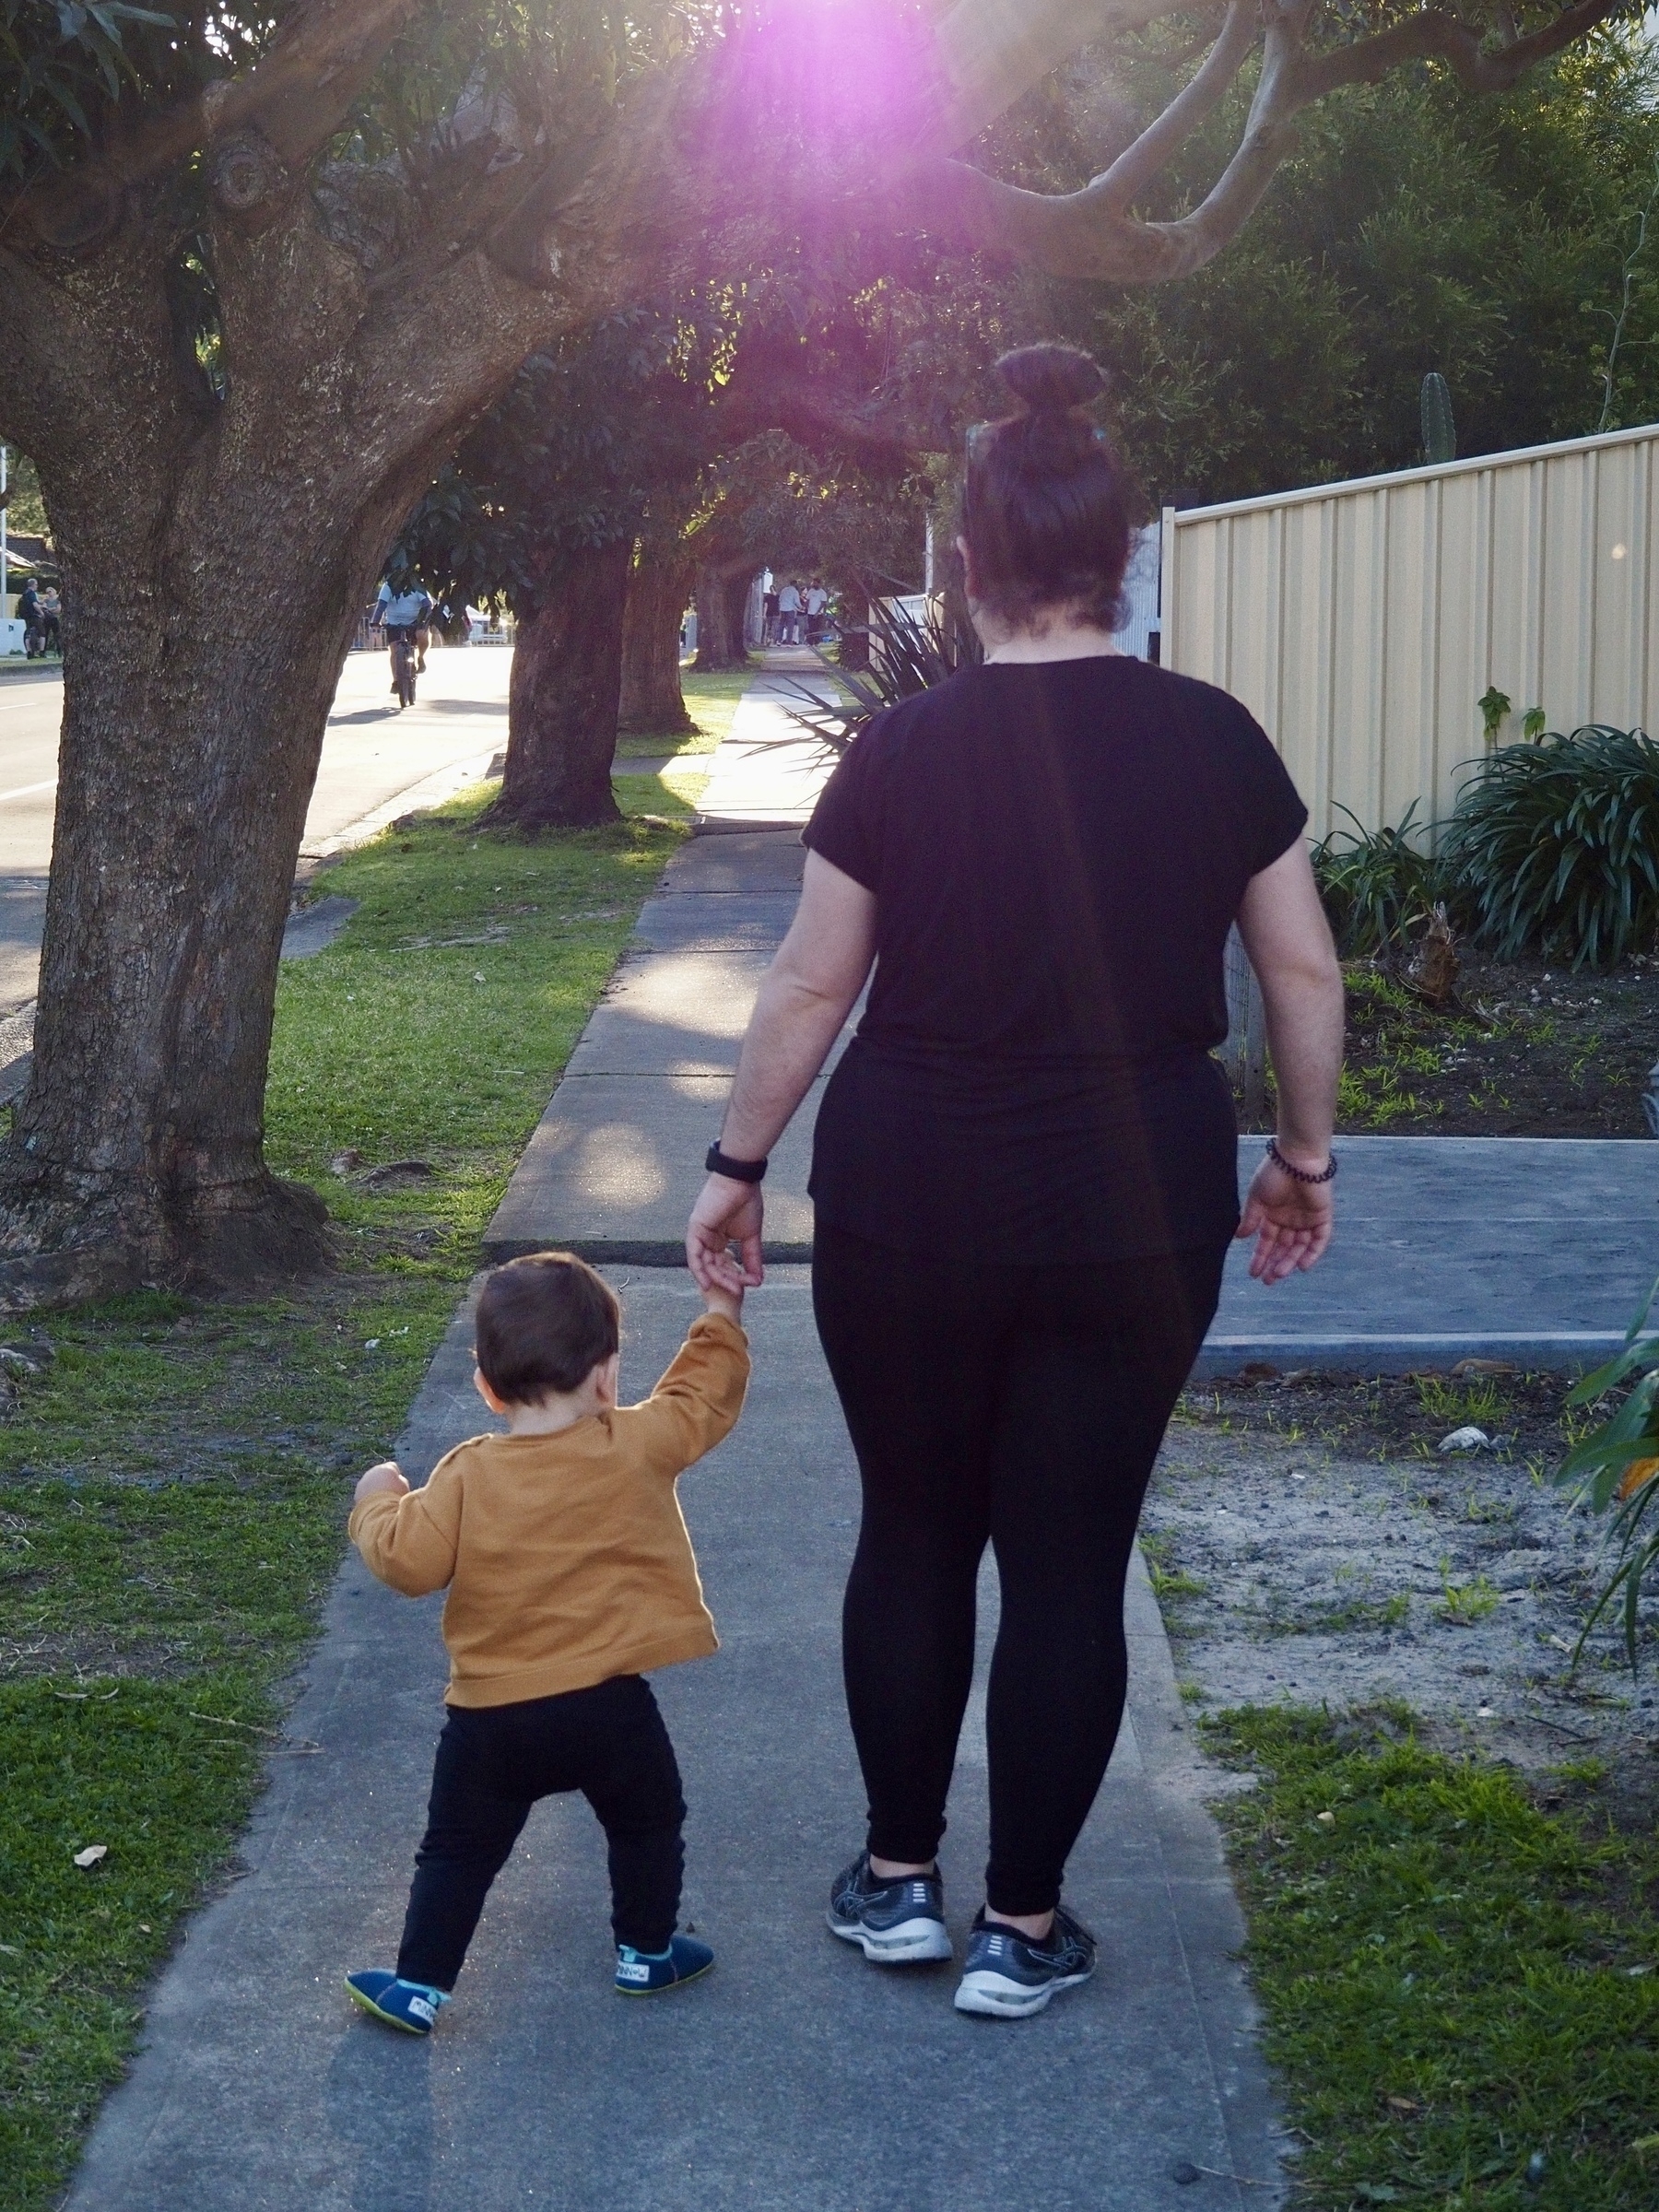 A mother and young child hold hands while walking along a footpath, with their backs to the camera.